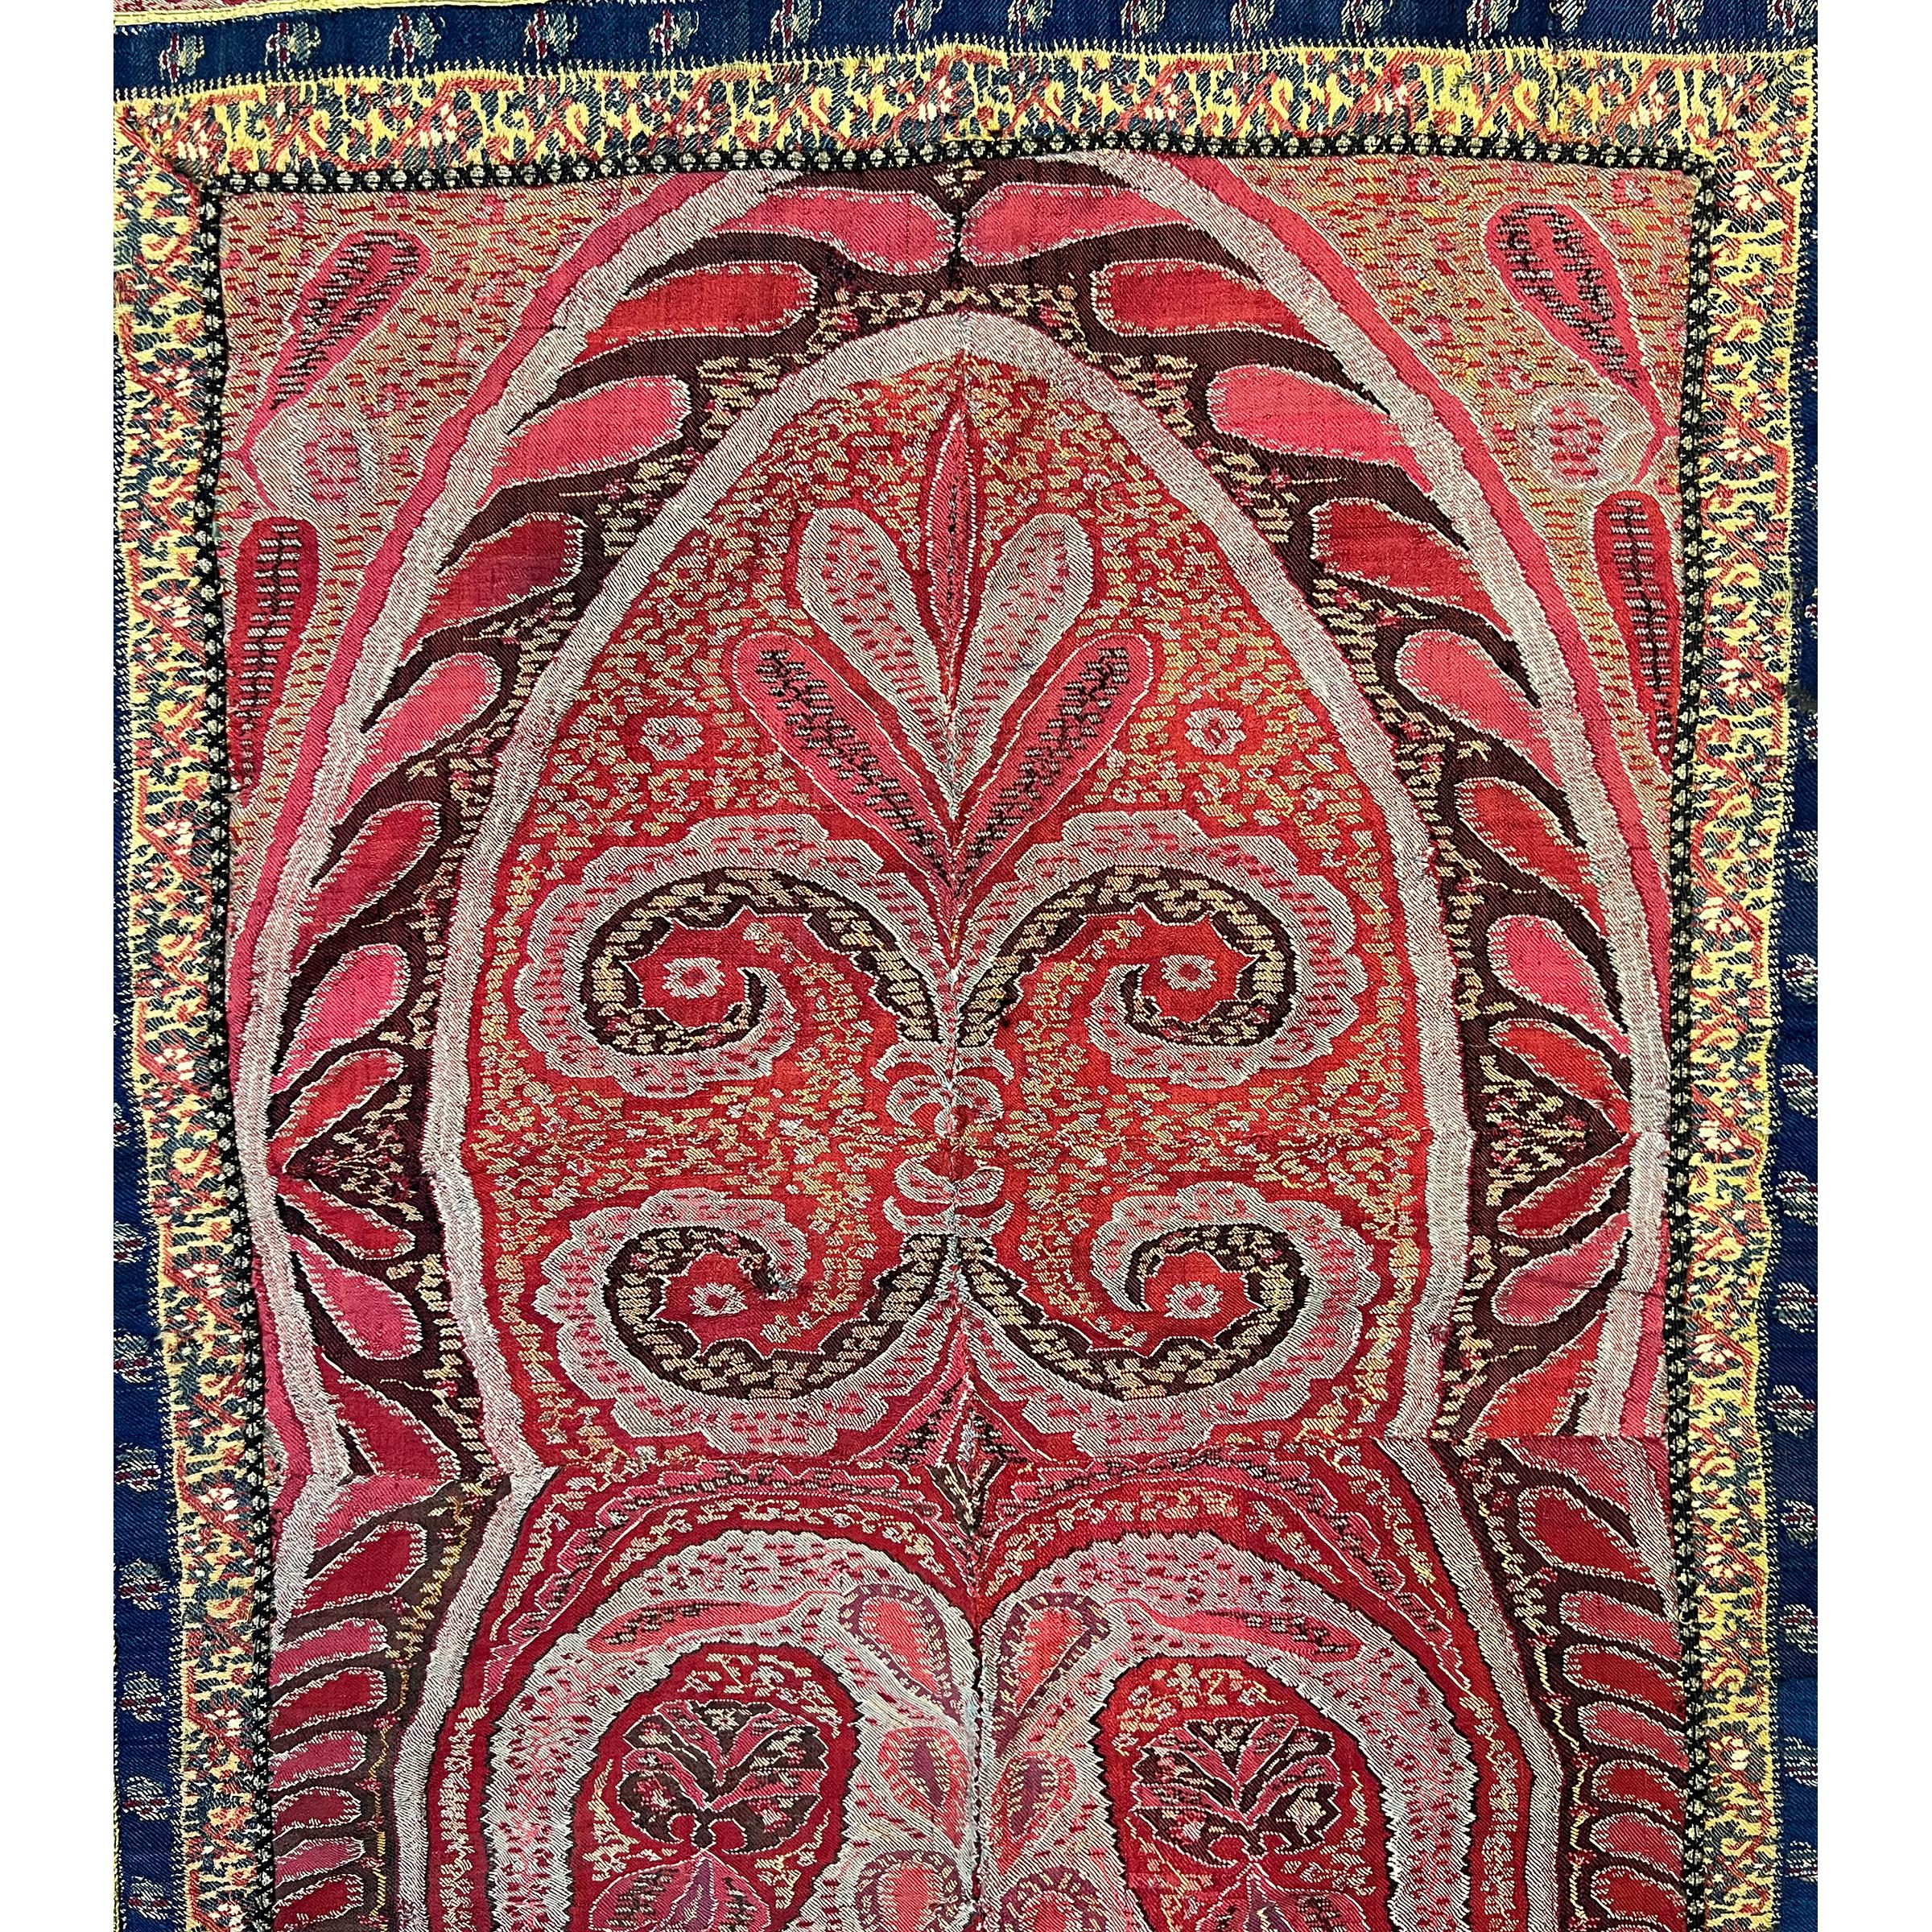 Red Indian Textile Runner, this runner features a beautiful Boteh design in shades of red, adorned with metal fringes that gracefully sway with movement, adding a sense of movement and fluidity to the piece, this piece dates back to the 19th